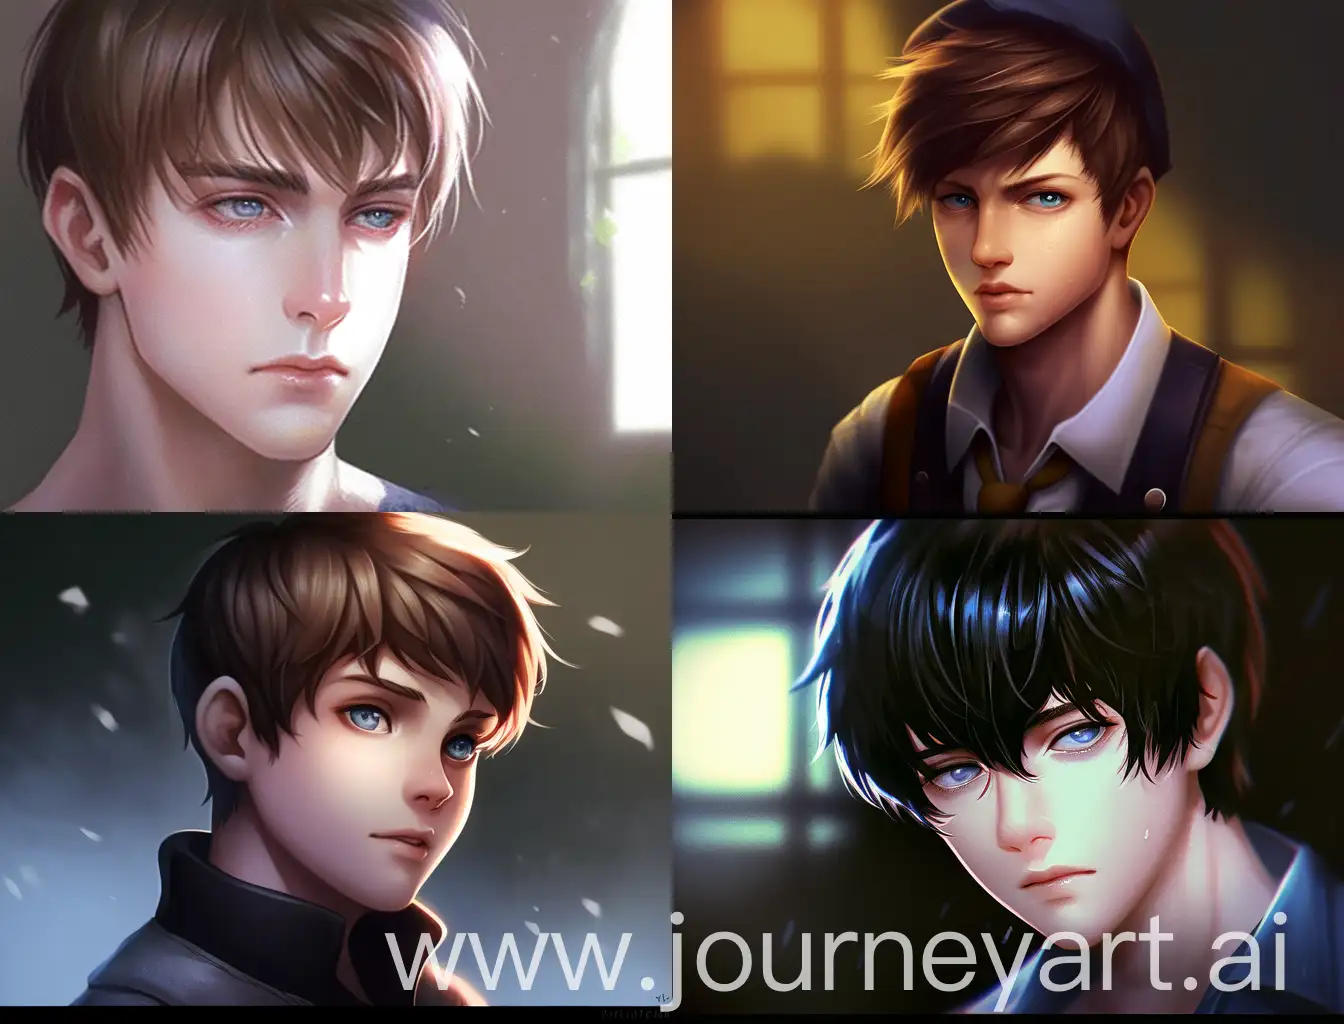 Made in a pleasant looking semi-realistic art style, with good lighting and composition portrait, almost anime-like: Male in earlier twenties “Fair complexion” + “Small pimples” + “Scars on his hands from factory work”))] [(Hair: “Dark brown, neatly combed”)] [(Eyes: “Sharp, calculating blue eyes”)] [(Clothes: “Simple attire, often in shades of gray and red” + “Plain button-down shirts”)